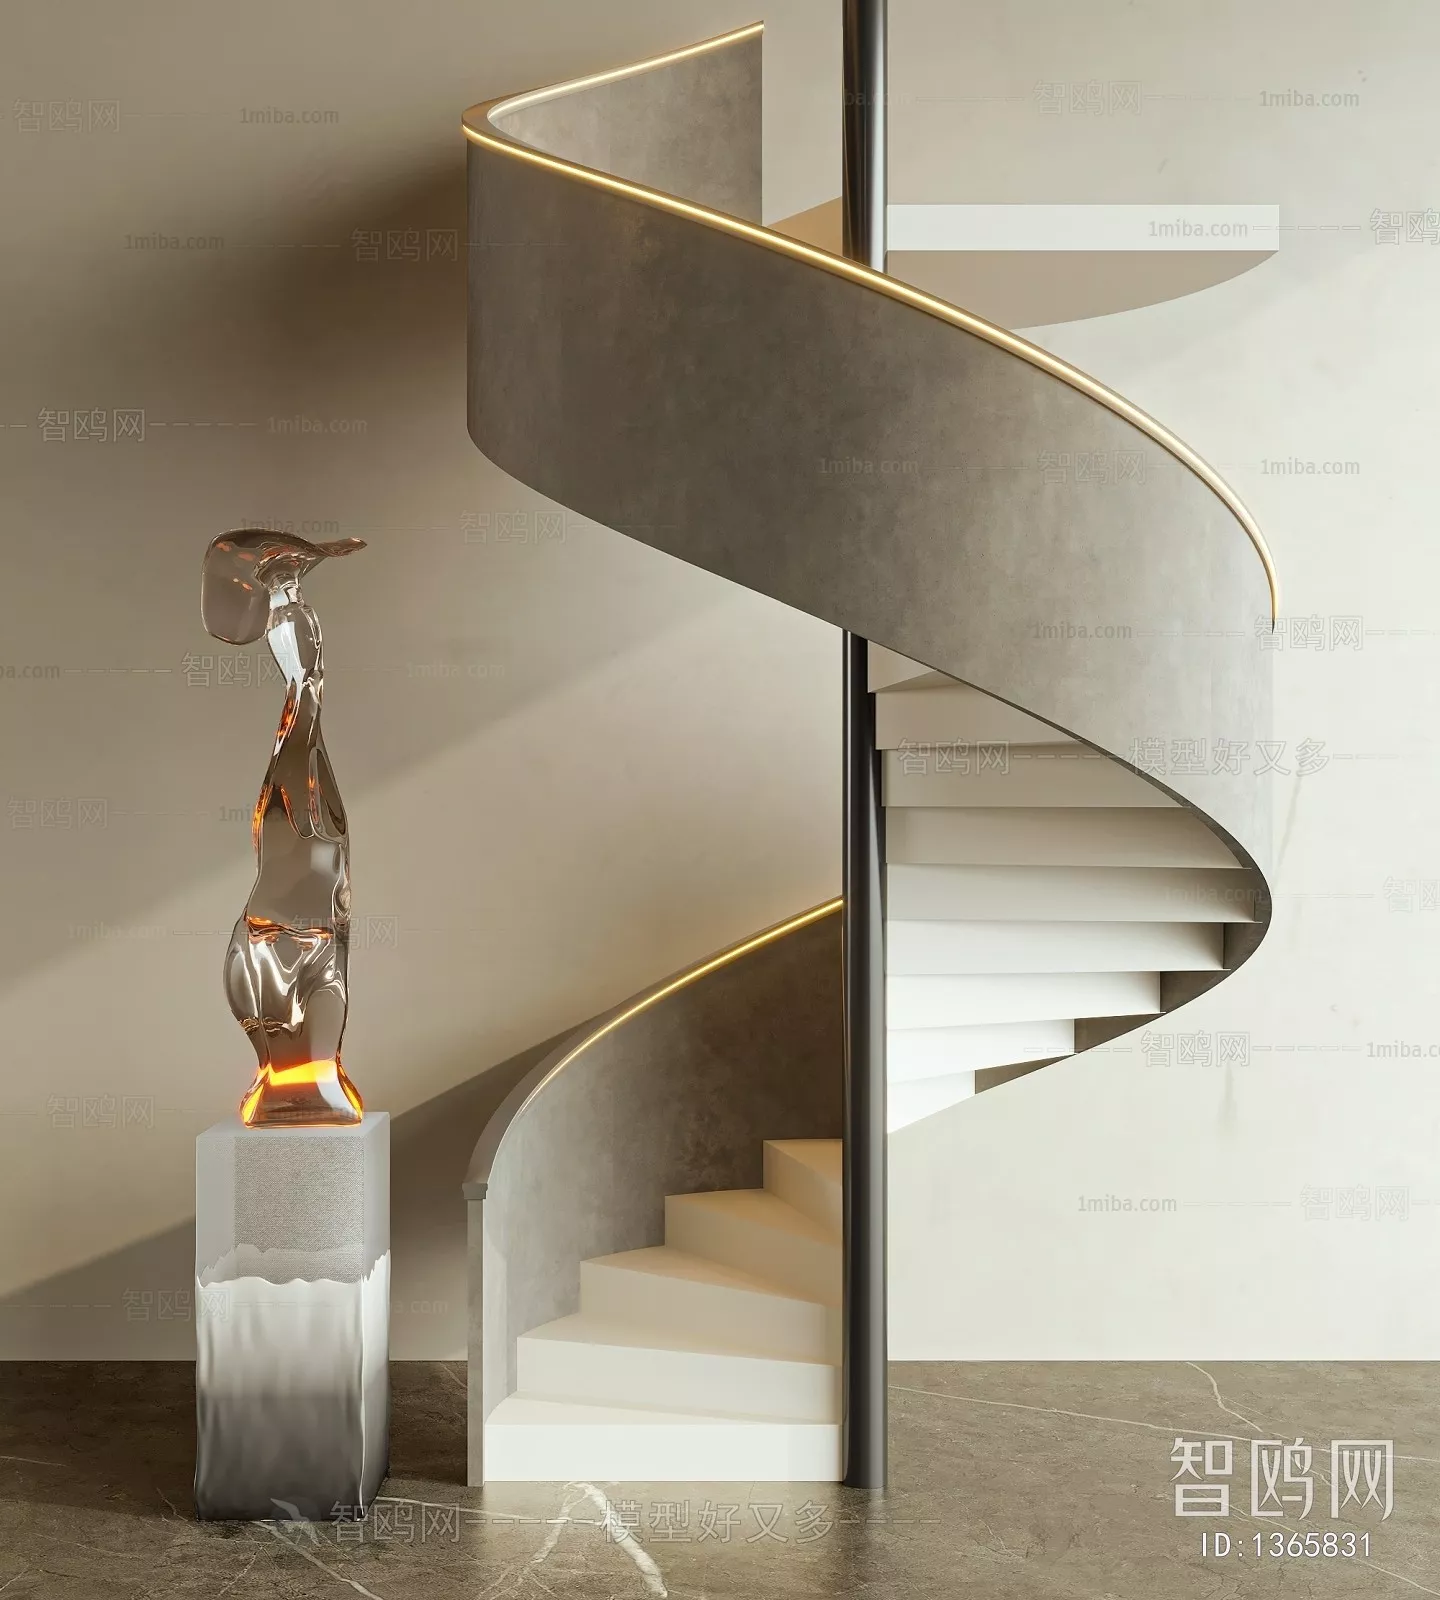 MODERN STAIR - SKETCHUP 3D MODEL - VRAY OR ENSCAPE - ID14205